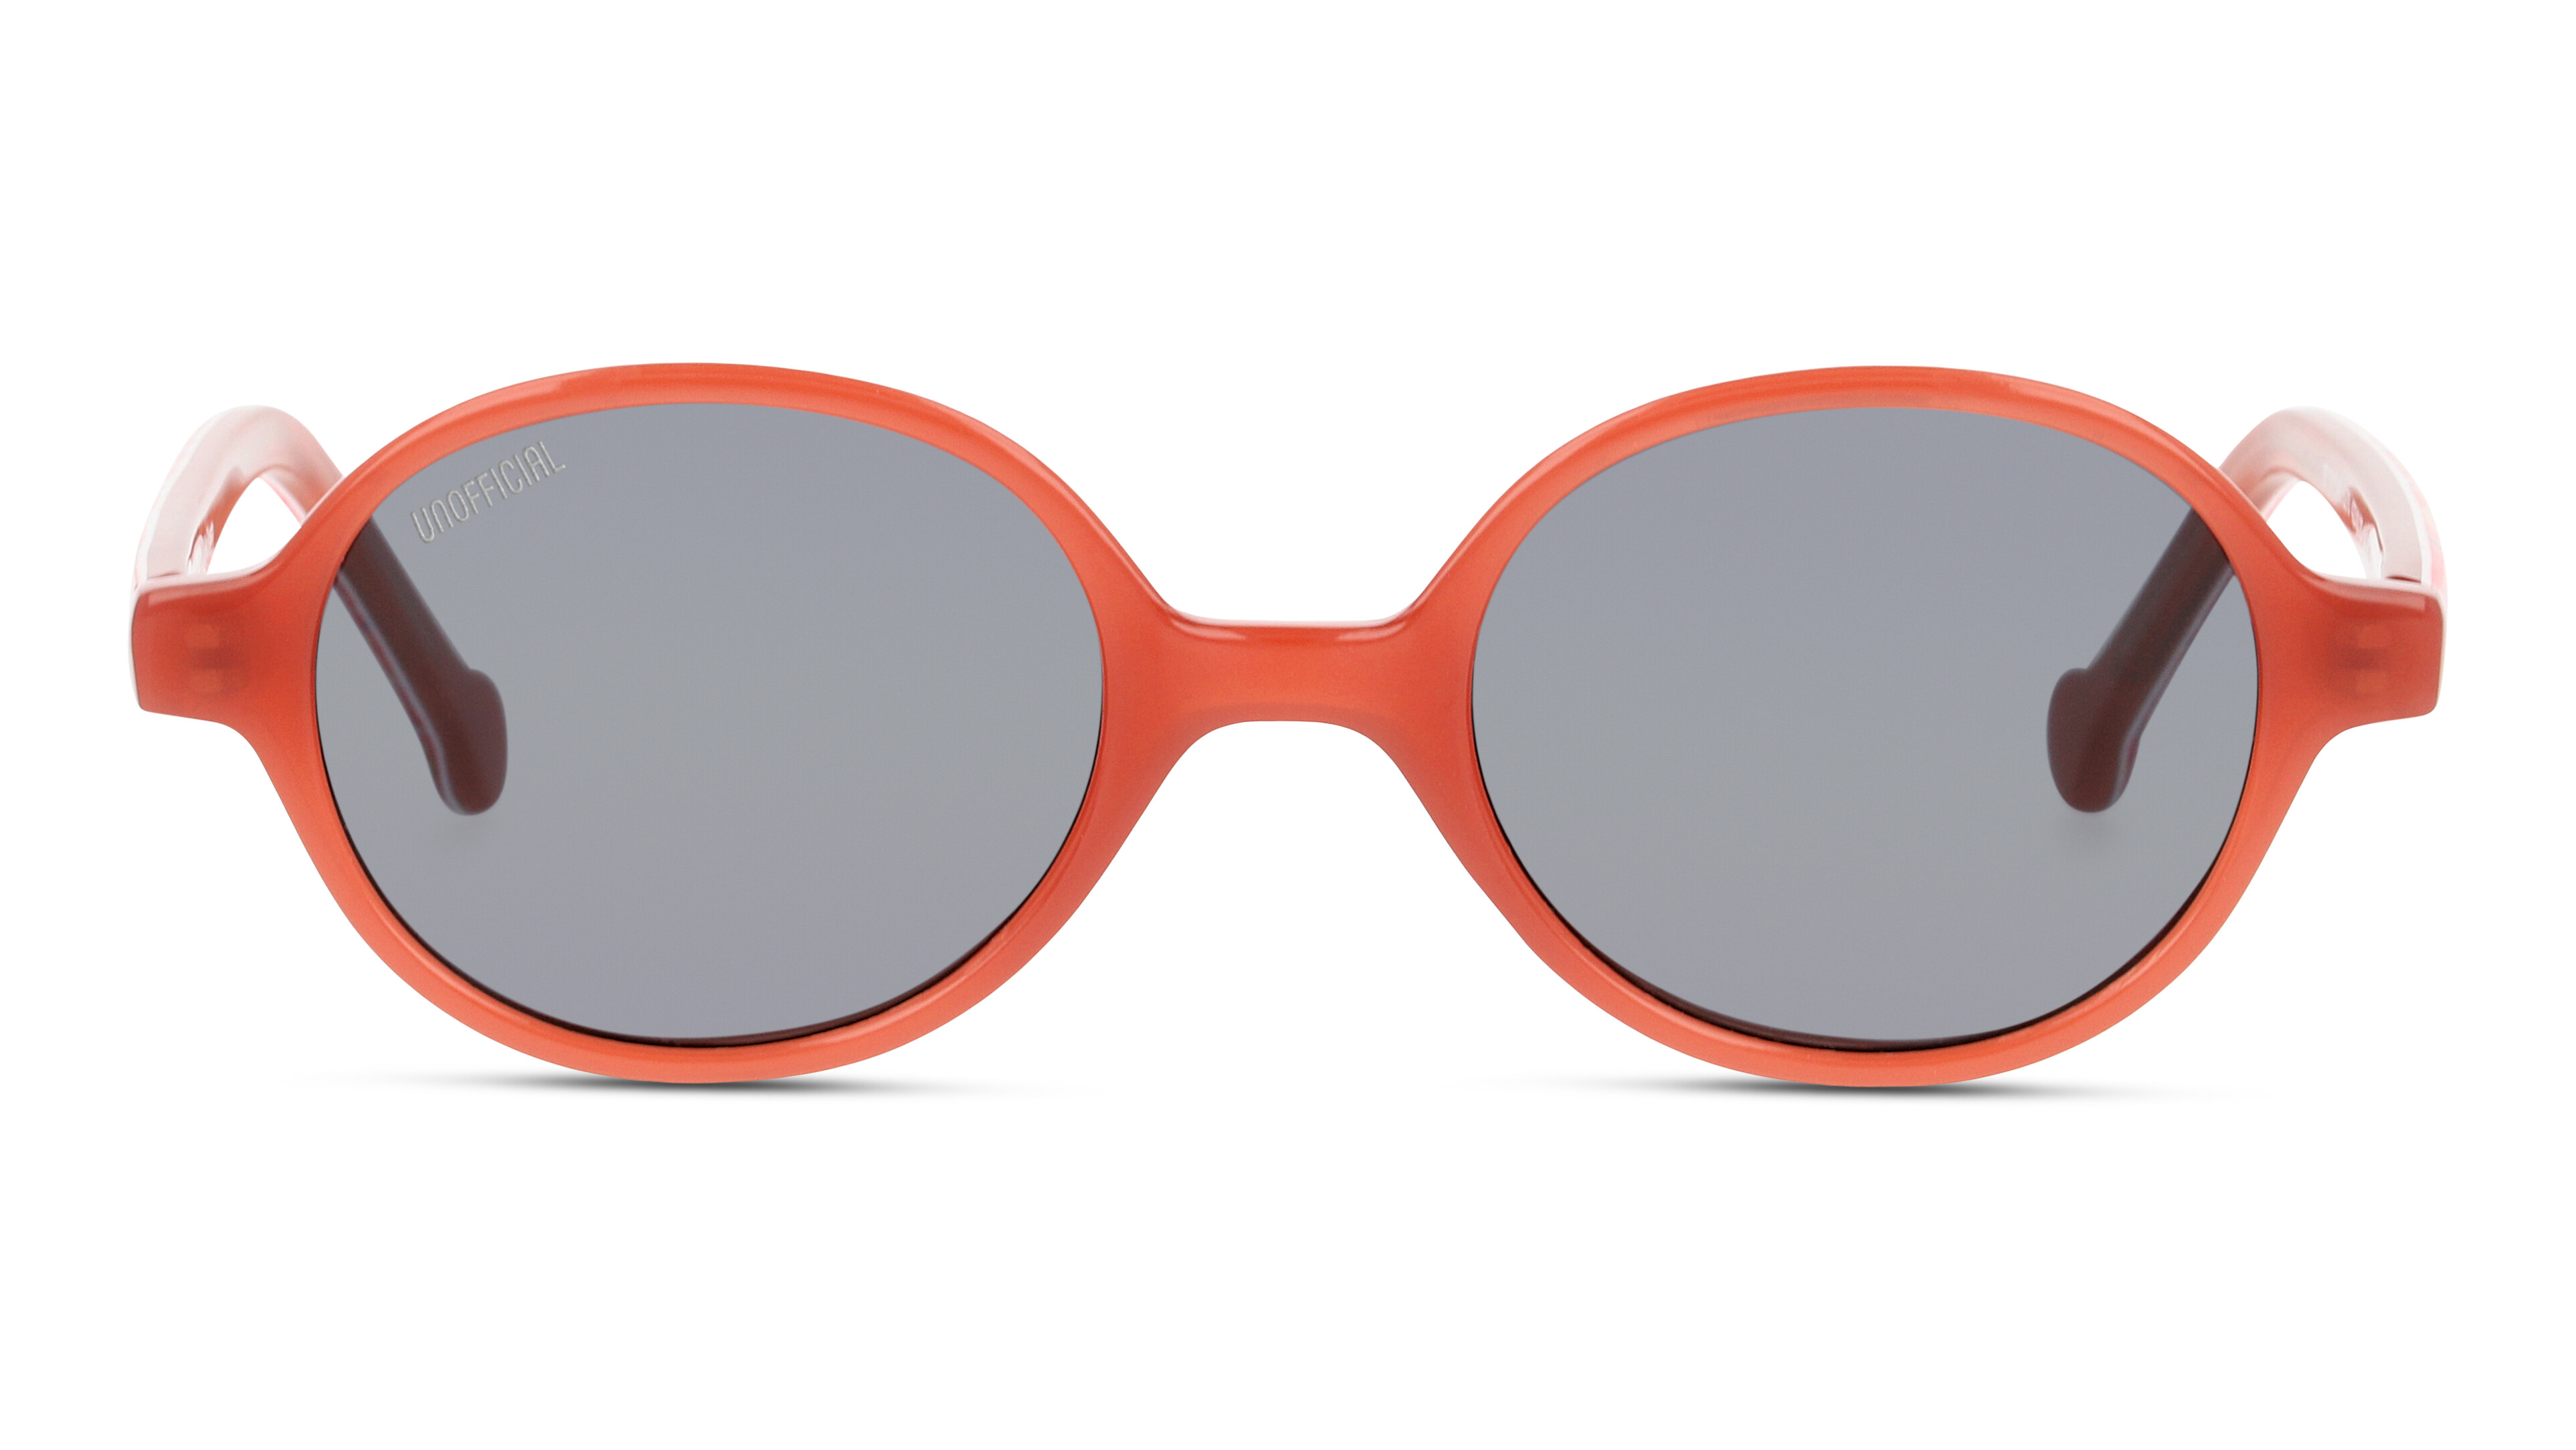 [products.image.front] UNOFFICIAL UNSK0019 PPG0 Sonnenbrille